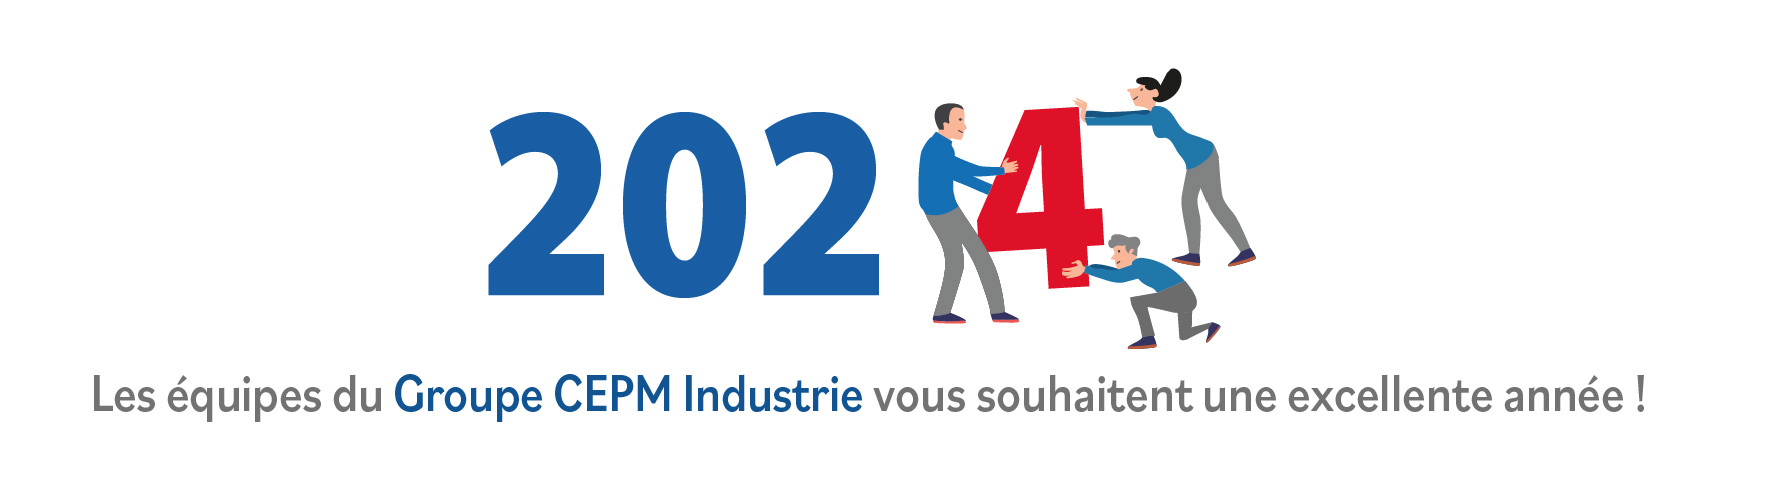 Voeux 2024_Groupe CEPM Industrie